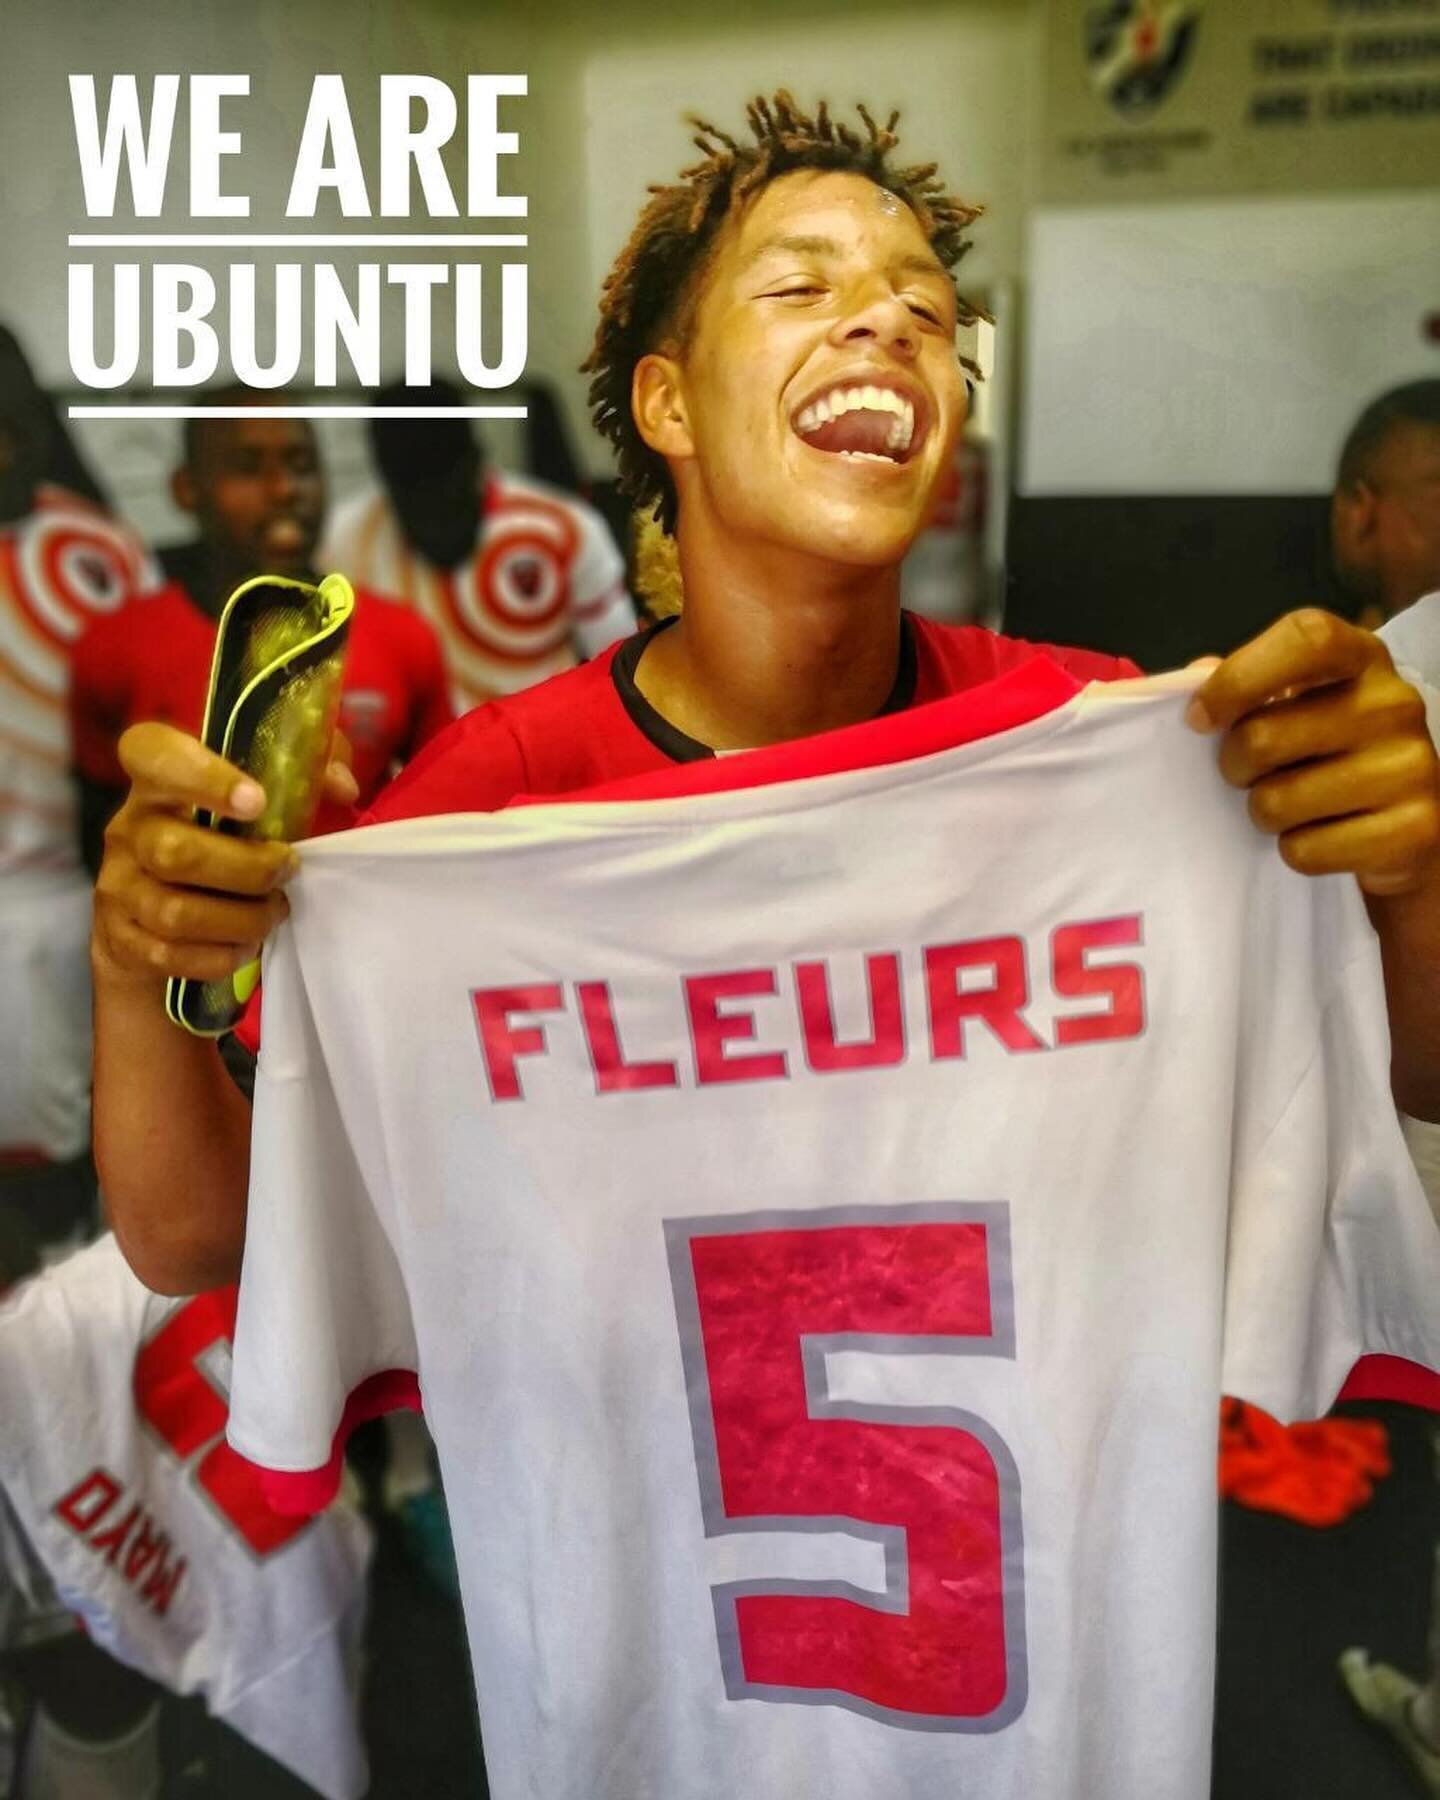 Late yesterday evening we received the devastating news that Luke Fleurs had been killed in a carjacking in Johannesburg. As an Ubuntu family, we mourn the loss of this talented, young man who was taken far too early and who had been a part of our Ub